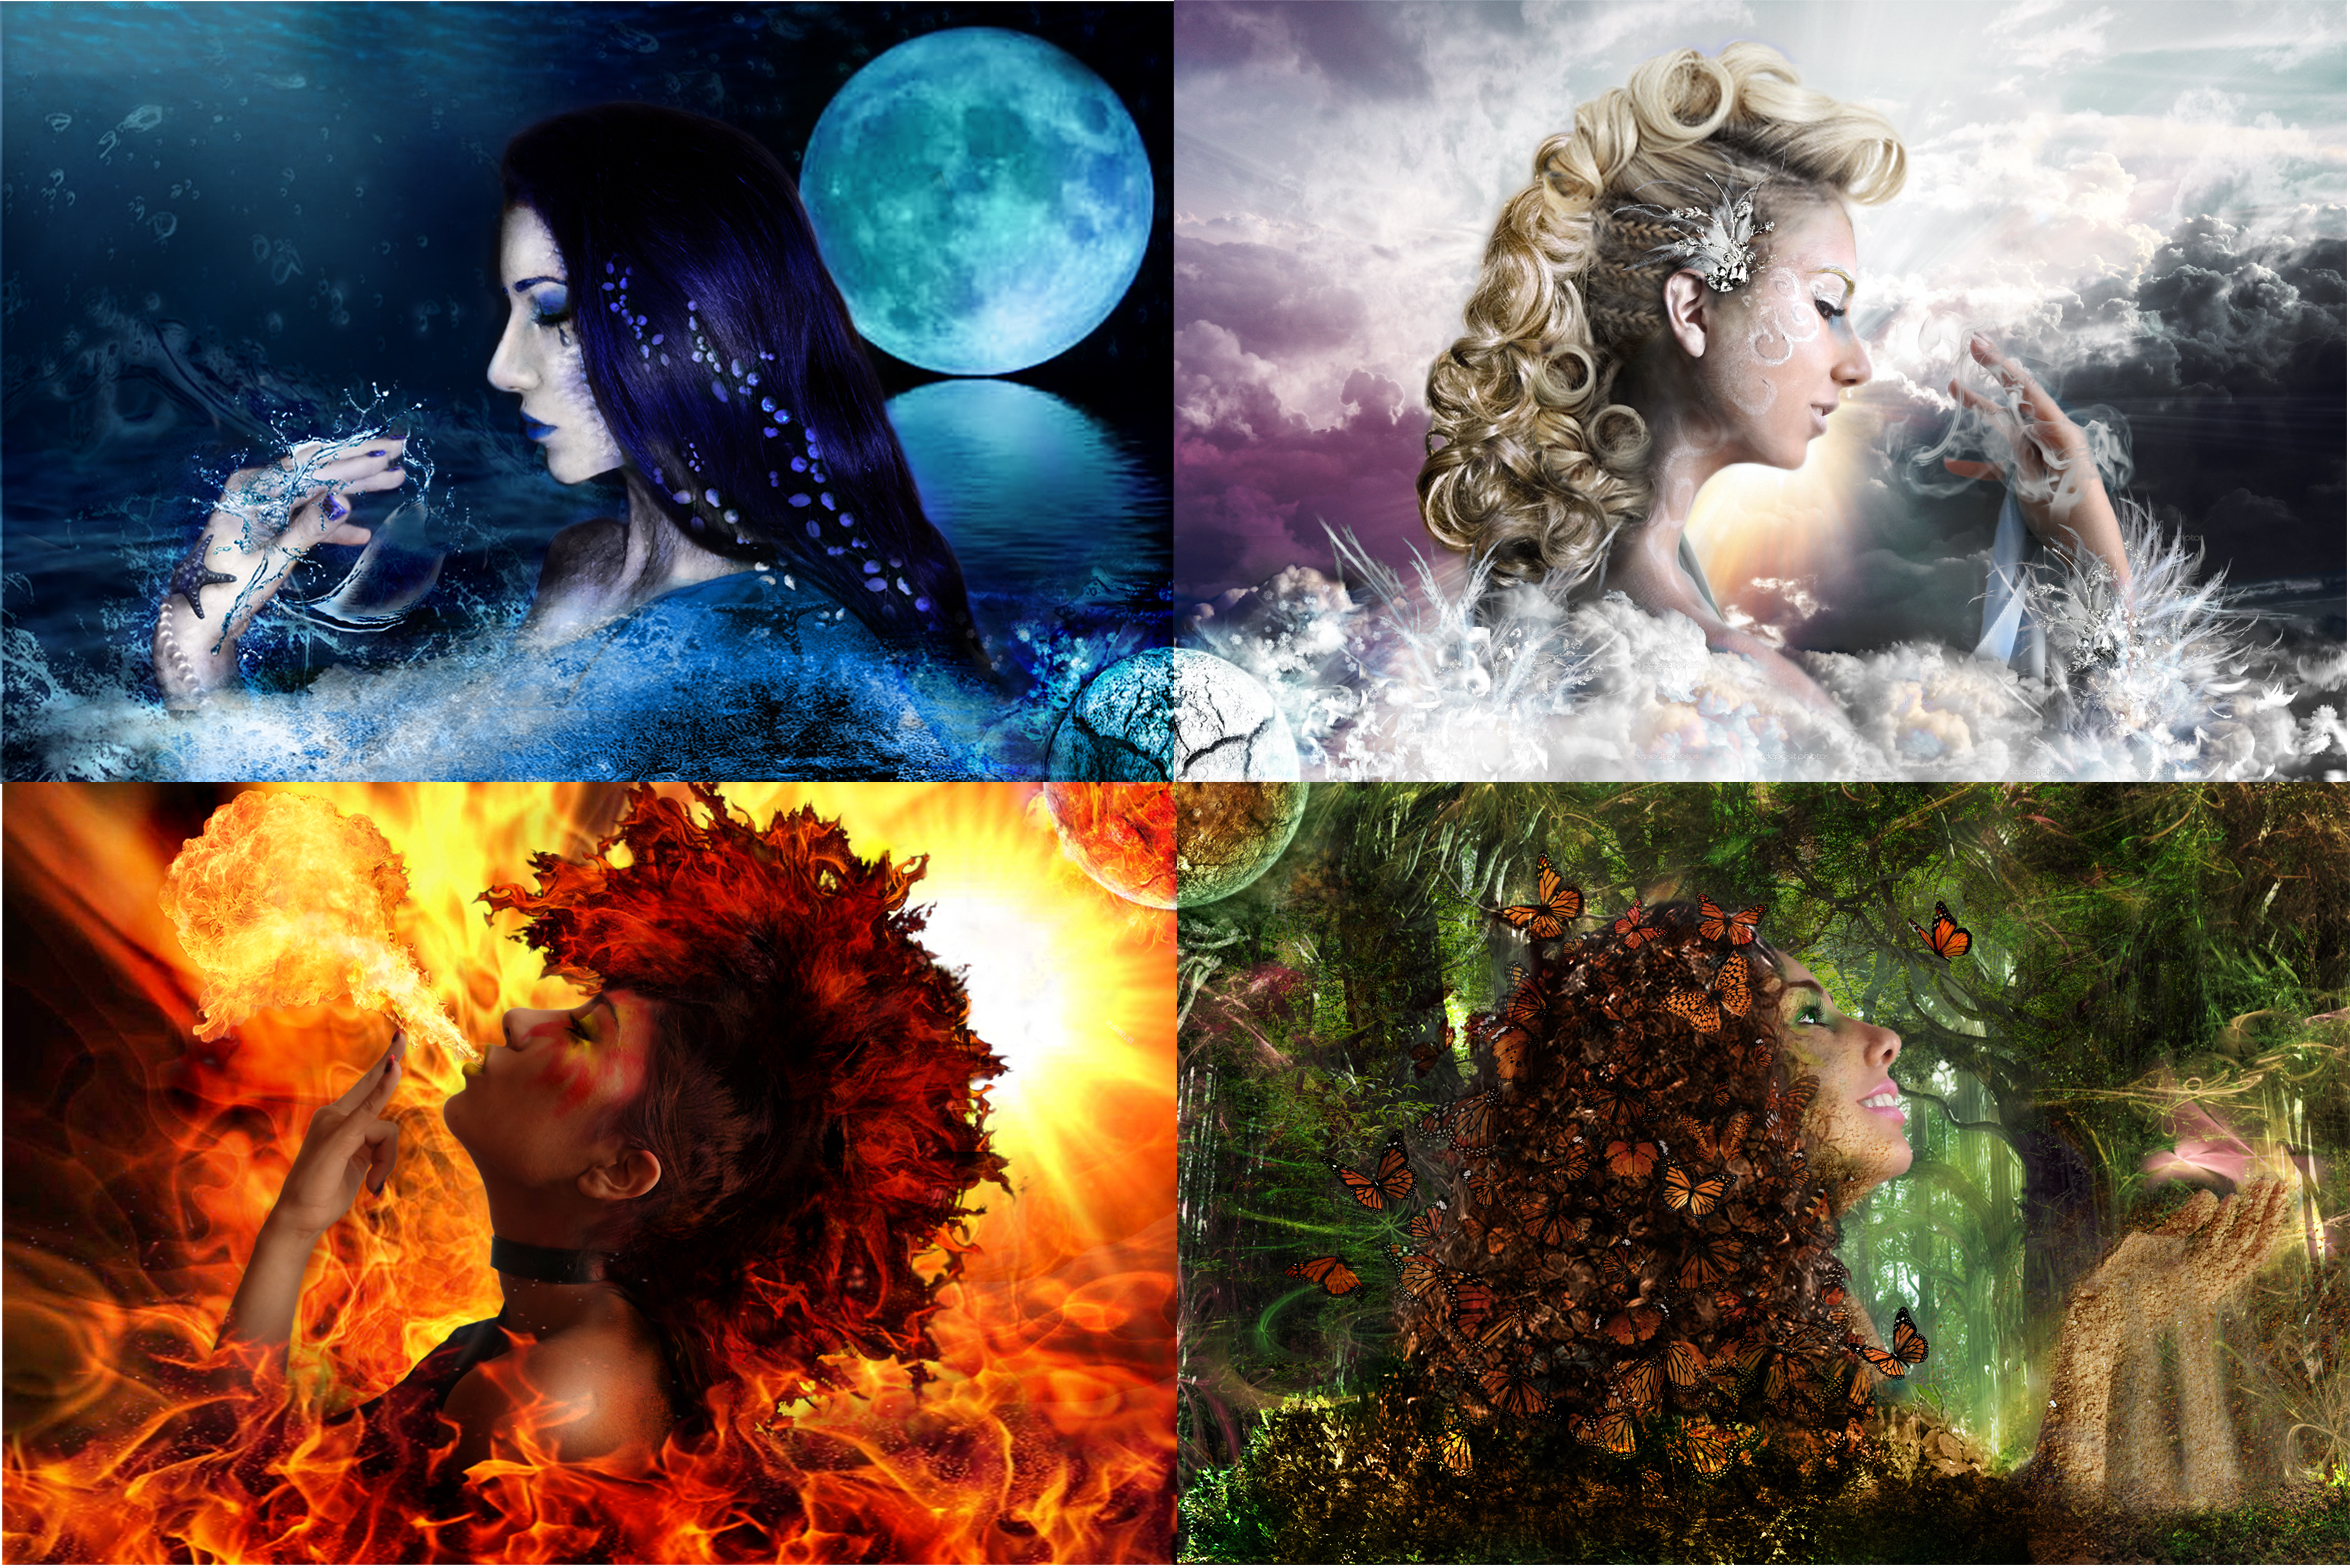 water, air, fire, earth - The Four Elements Photo (35905064) - Fanpop